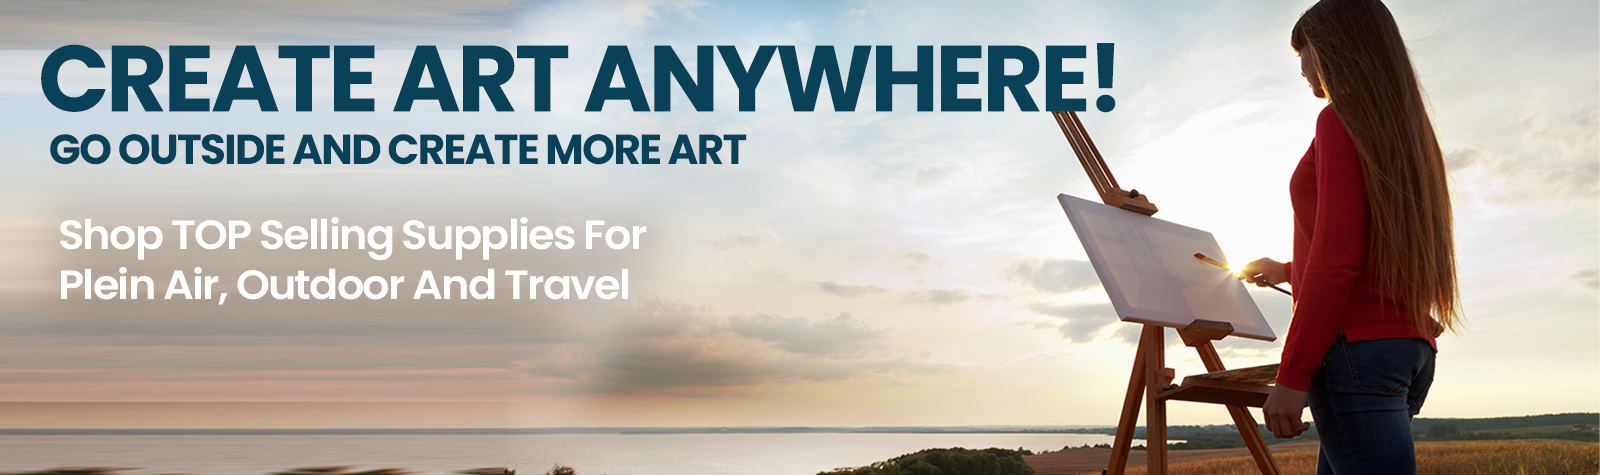 Create Art Anywhere - Top Selling Art Supplies for Plein Air, Outdoor and Travel